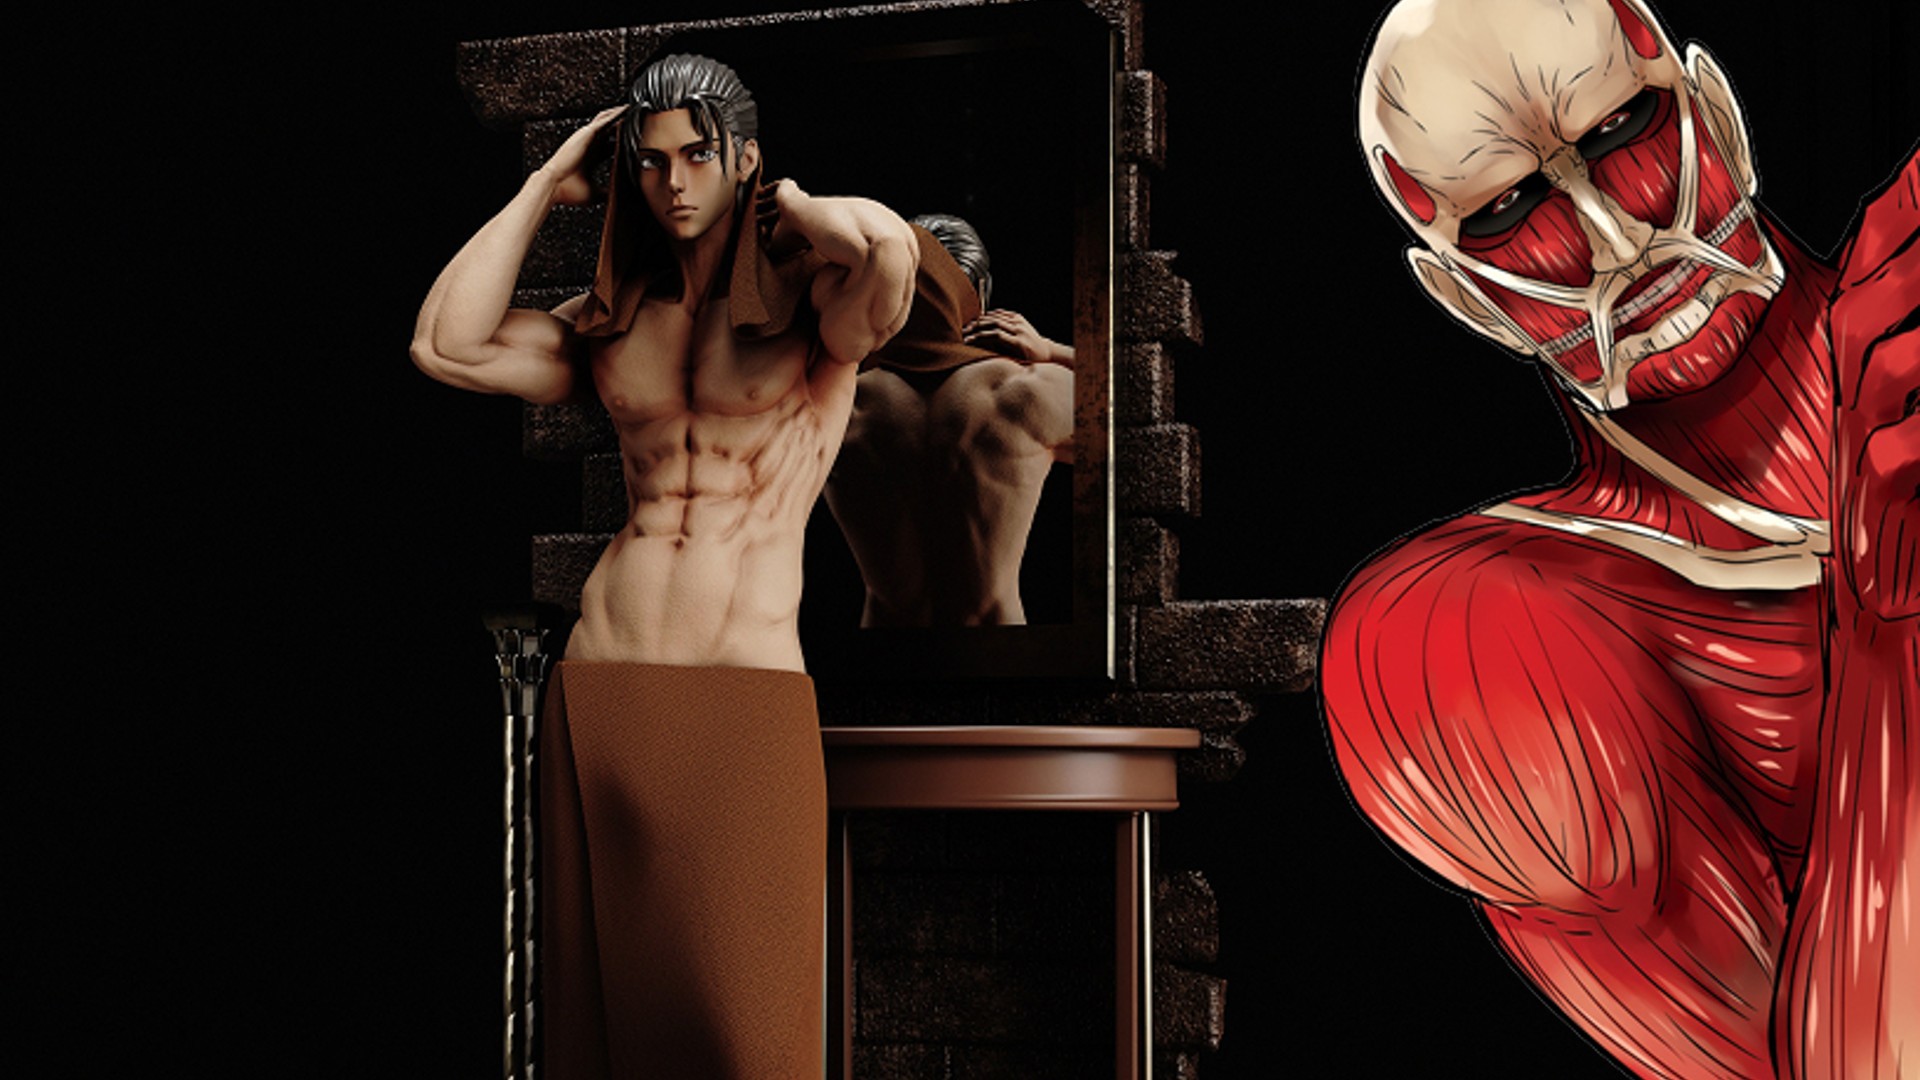 – May 05, 2022 – 02:41:36 PM A nude eren figure It is already the...